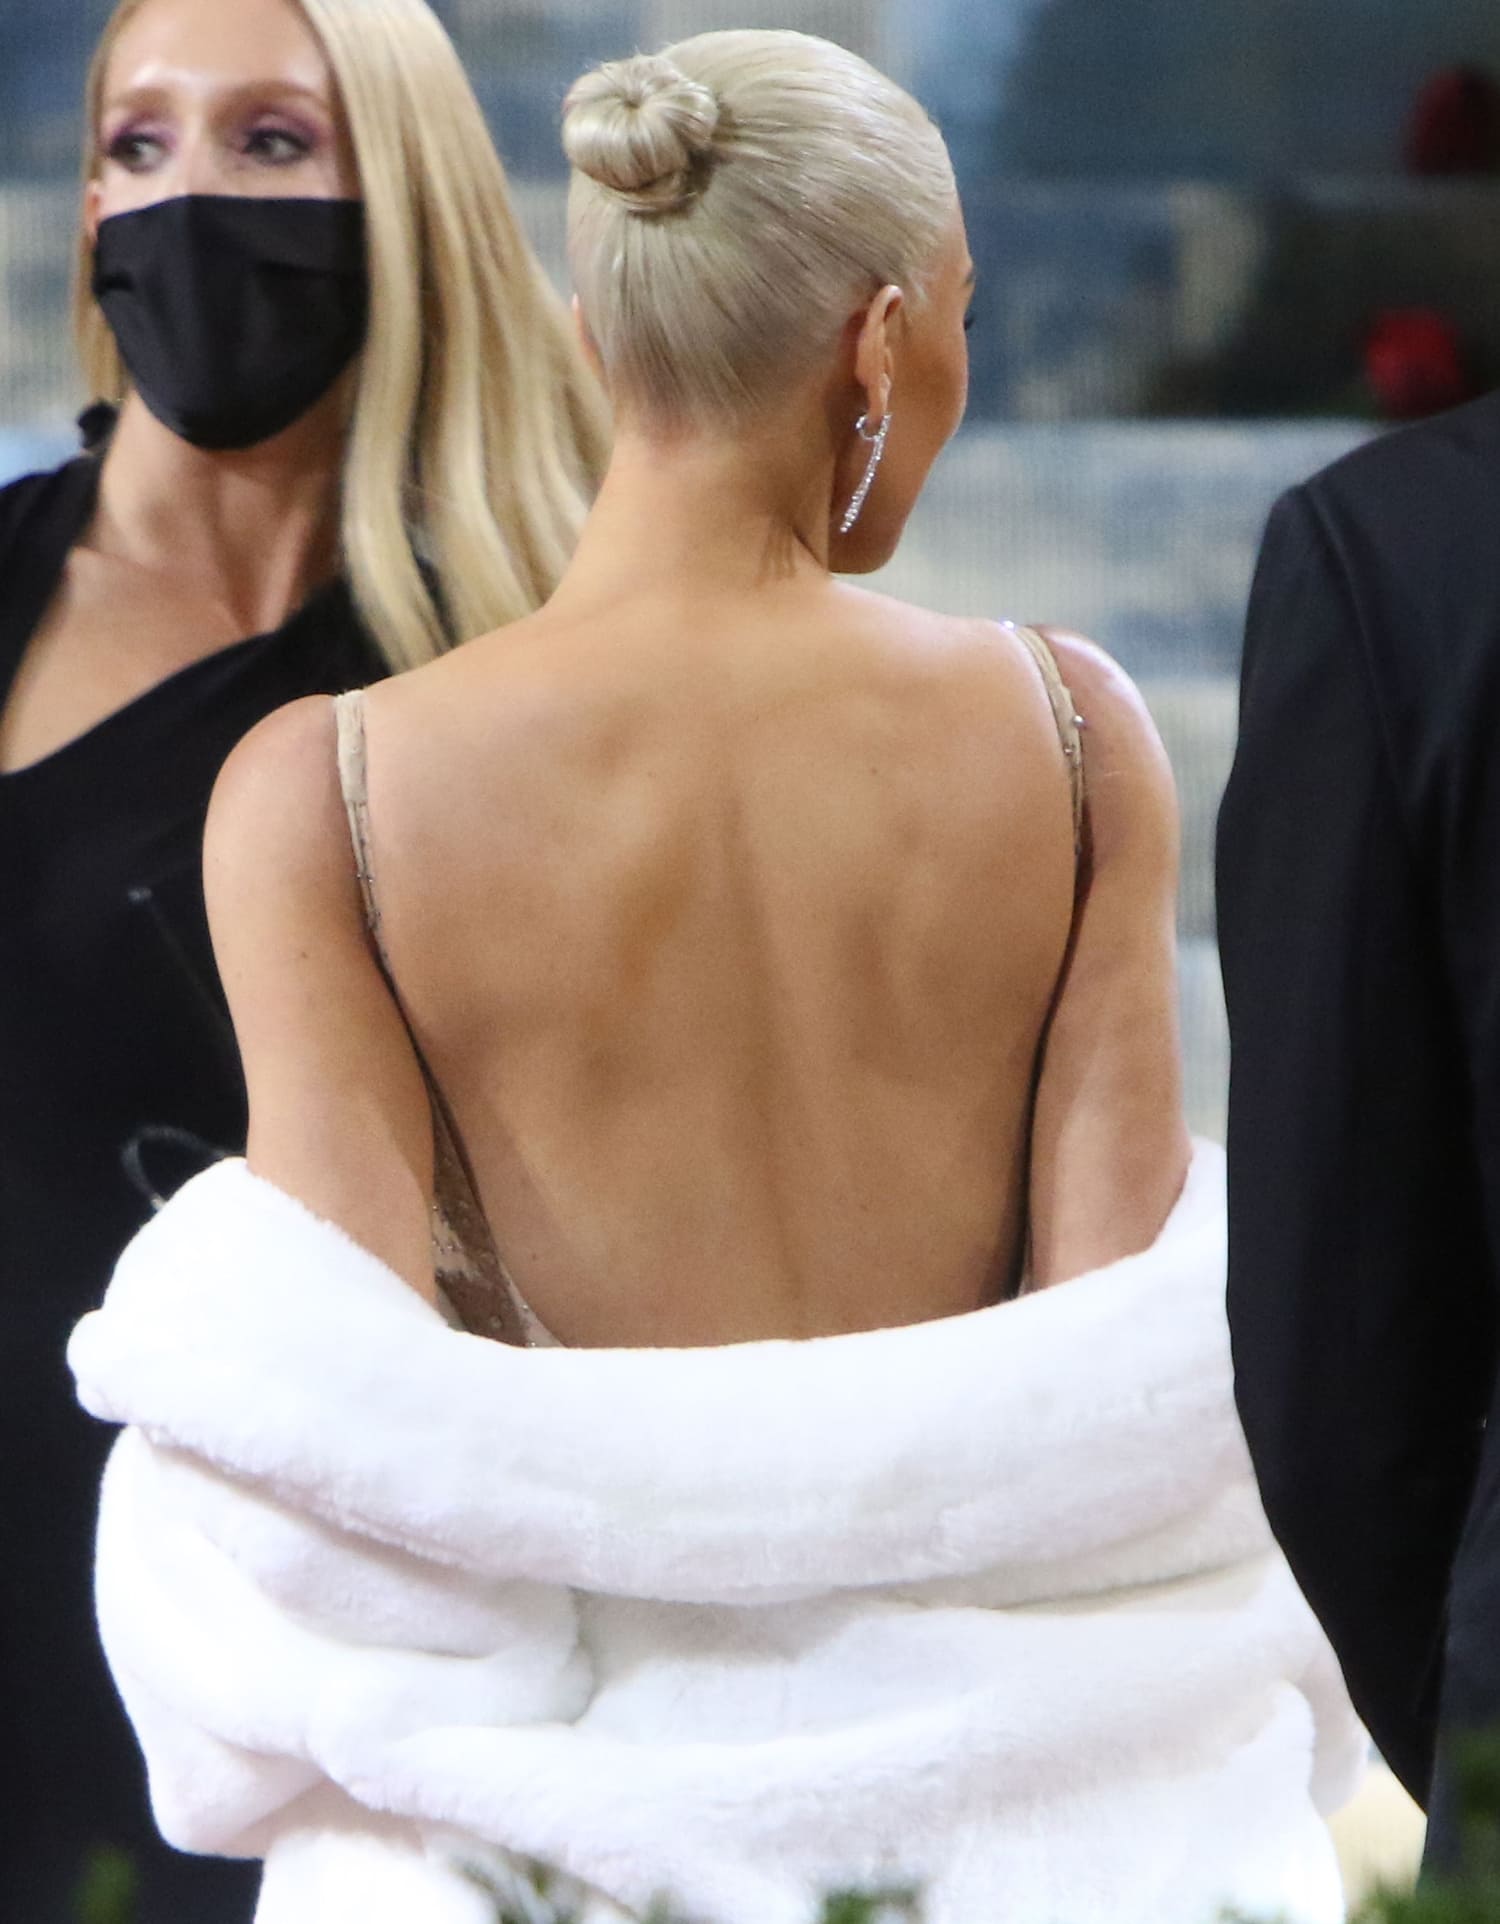 Kim Kardashian reportedly couldn't zip up her Marilyn Monroe dress and covered up with a fur shawl